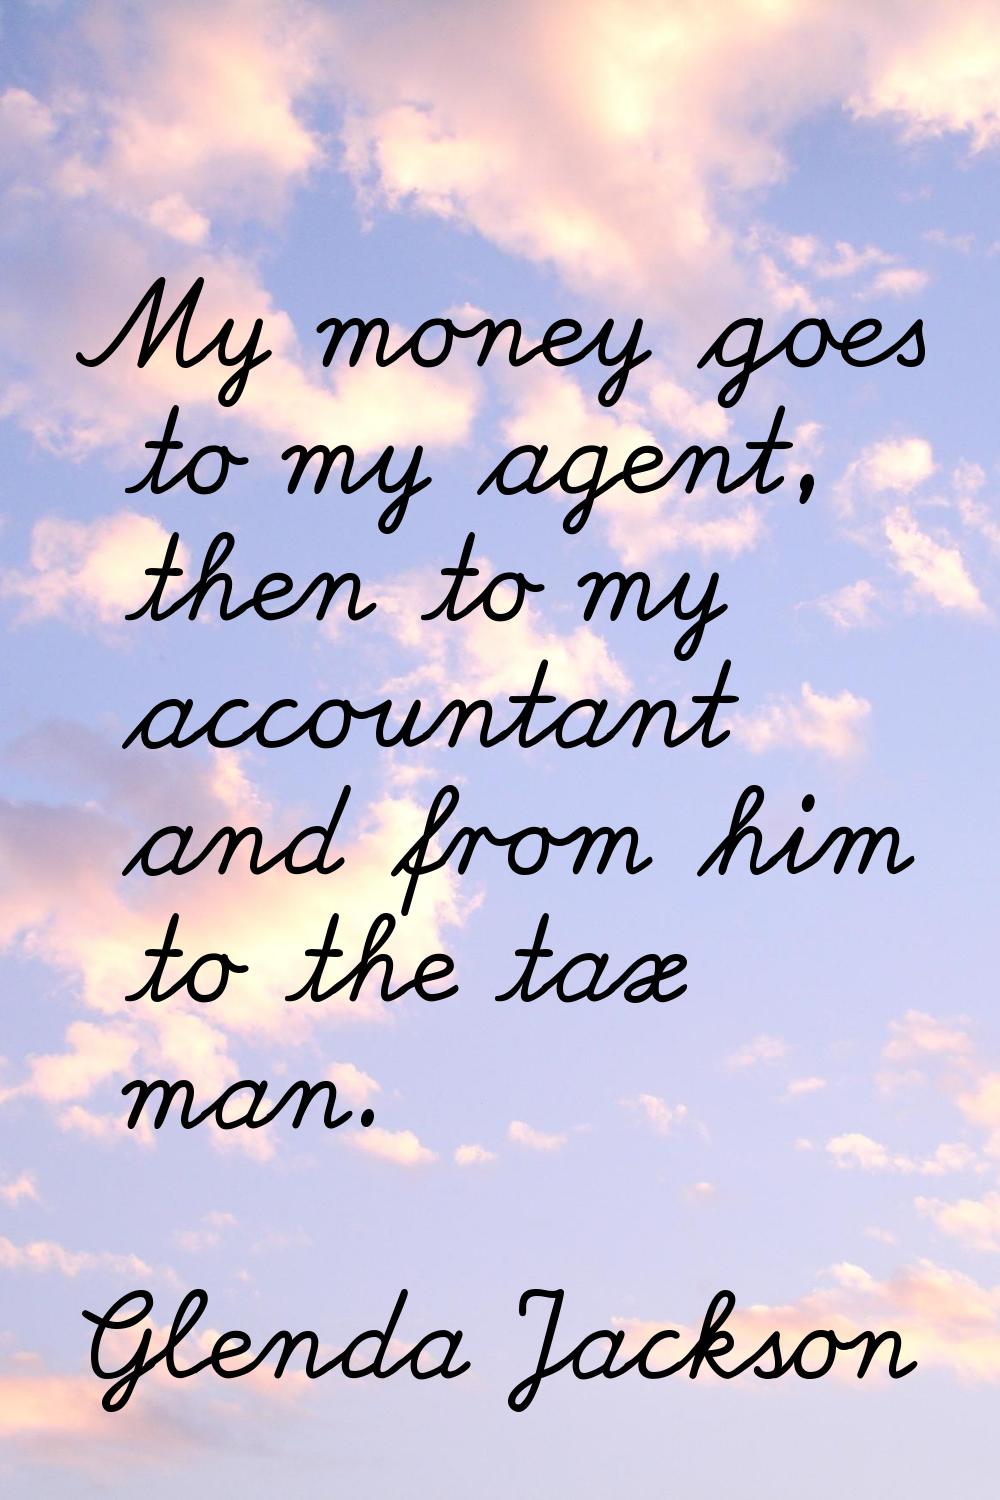 My money goes to my agent, then to my accountant and from him to the tax man.